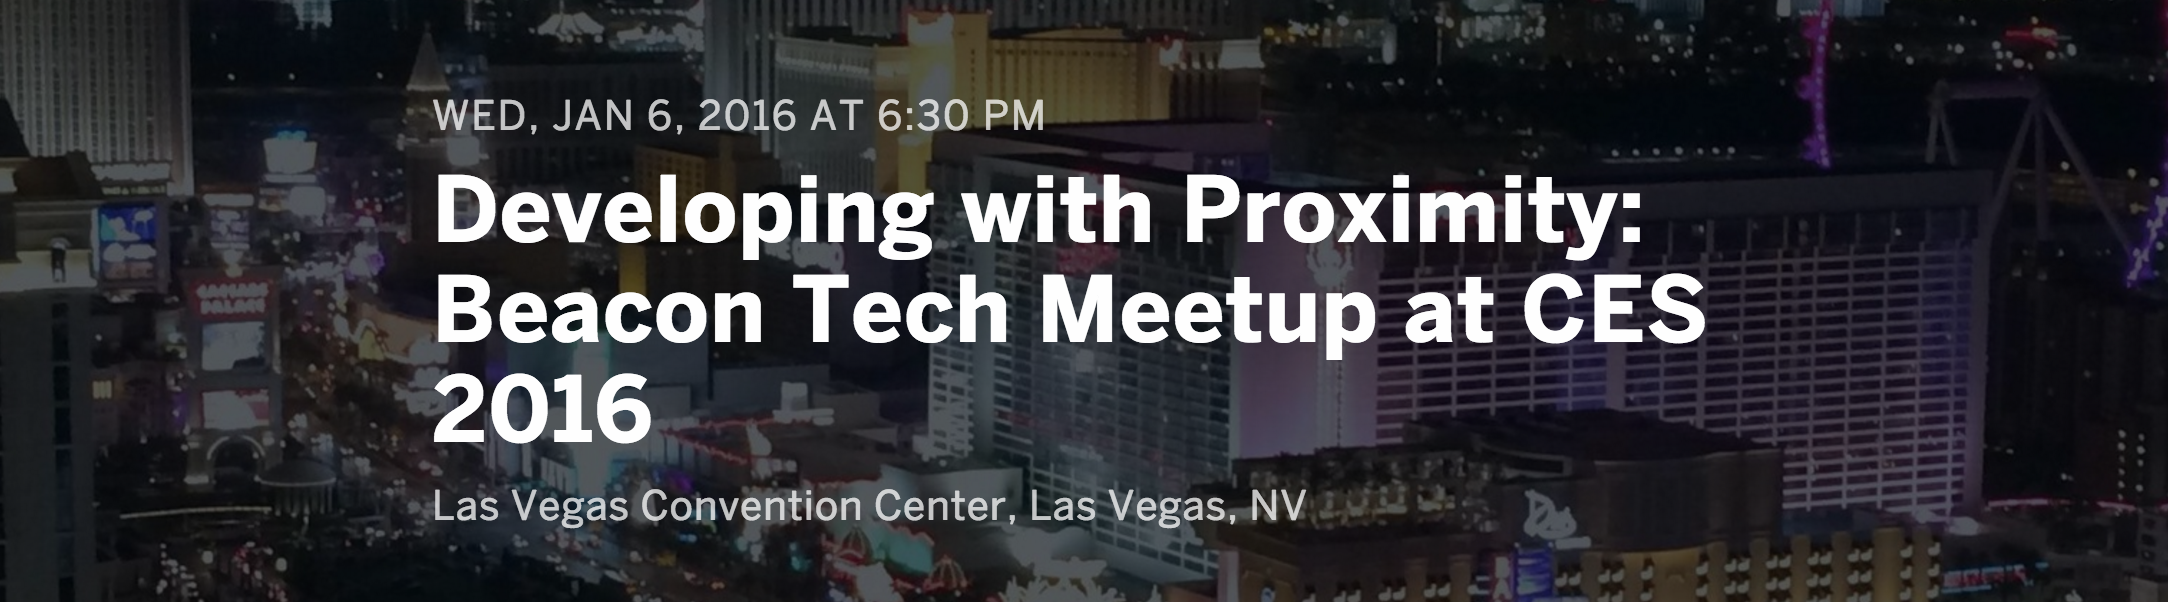 WED, JAN 6, 2016 AT 6:30 PM Developing with Proximity: Beacon Tech Meetup at CES 2016